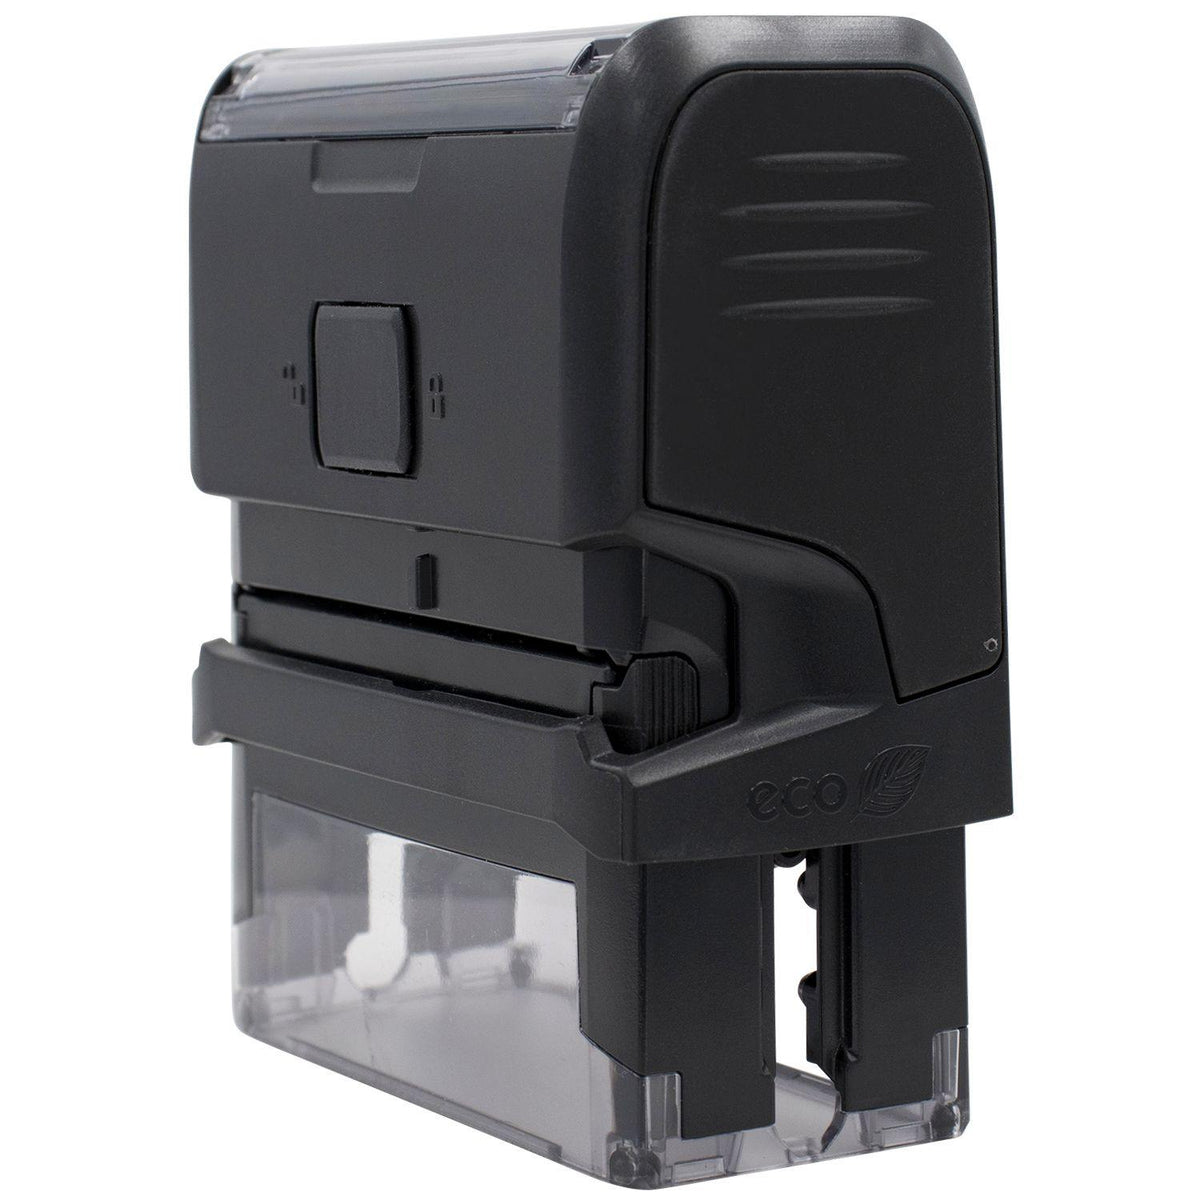 Self-Inking Draft with Letter Stamp - Engineer Seal Stamps - Brand_Trodat, Impression Size_Small, Stamp Type_Self-Inking Stamp, Type of Use_General, Type of Use_Office